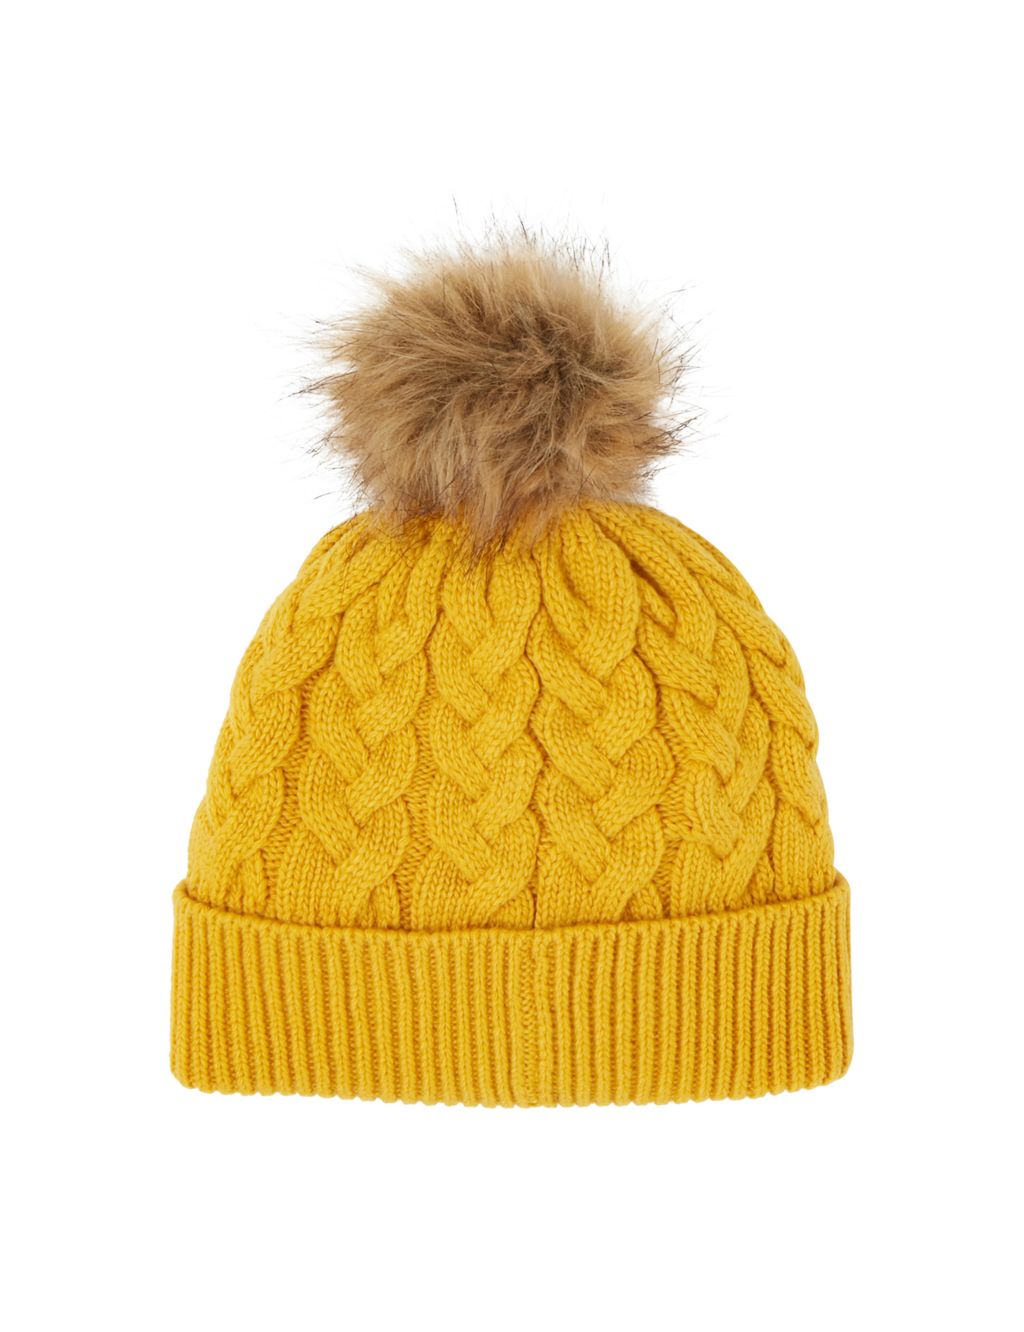 Knitted Pom Beanie Hat image 4